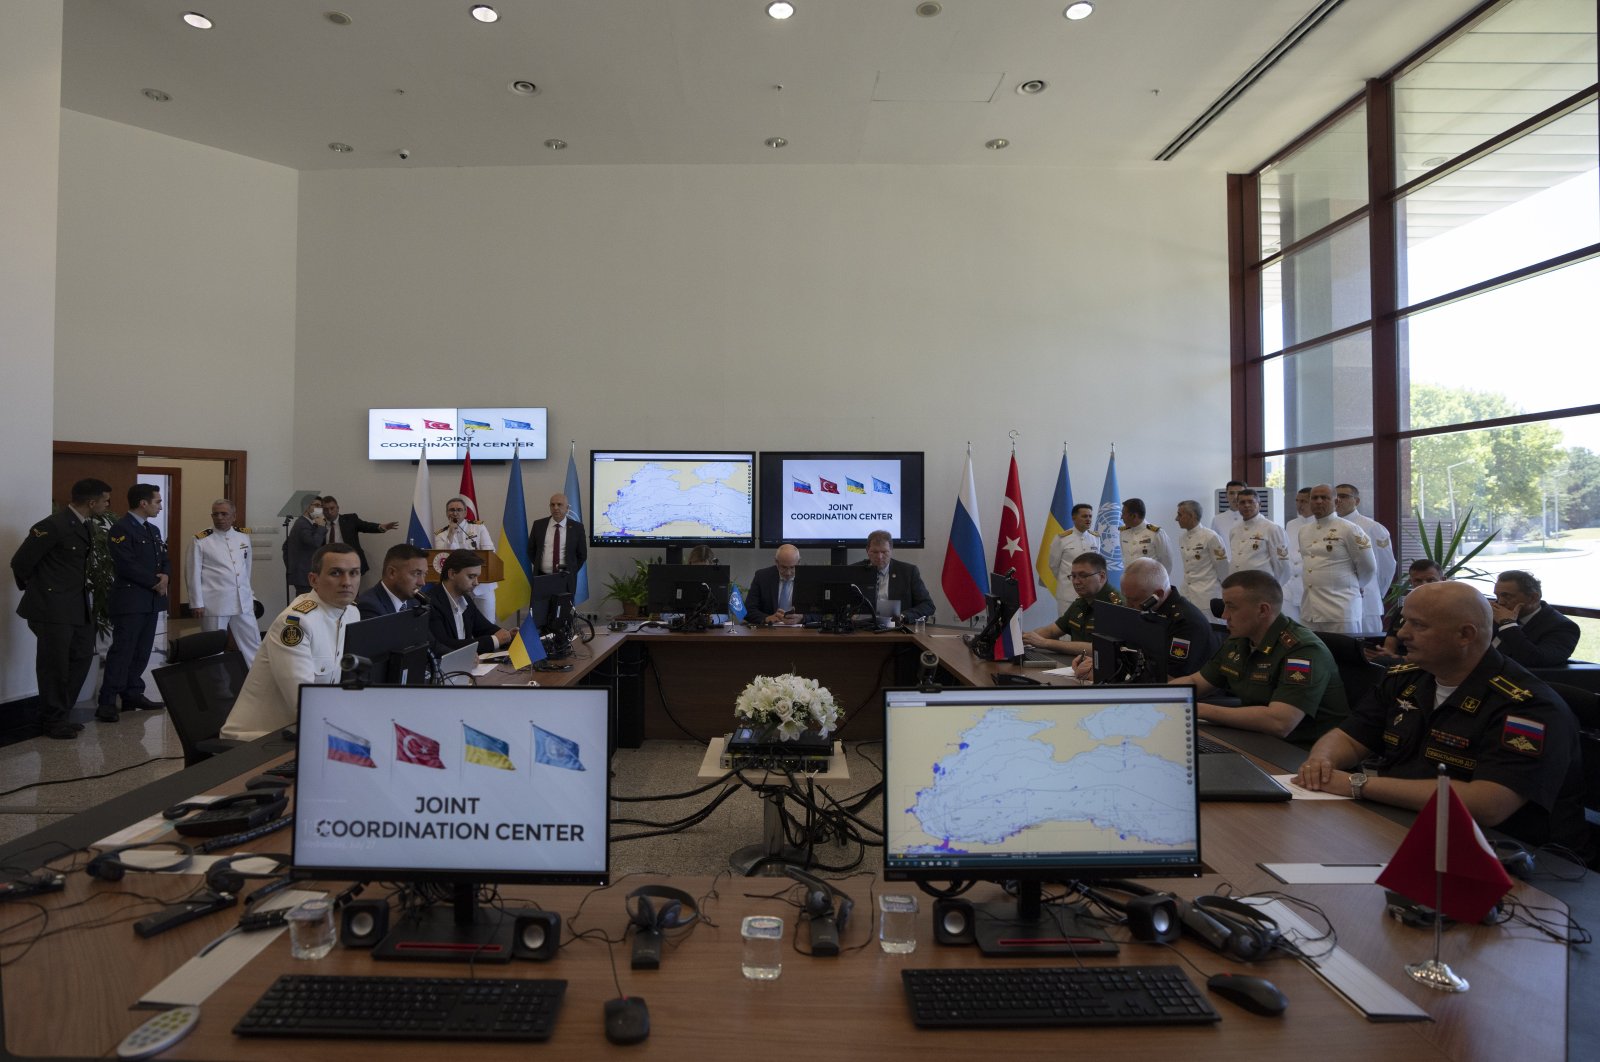 Representatives from the Russian and Ukrainian defense ministries attend the launch of the joint coordination center in Istanbul, Turkey, July 27, 2022. (AP Photo)